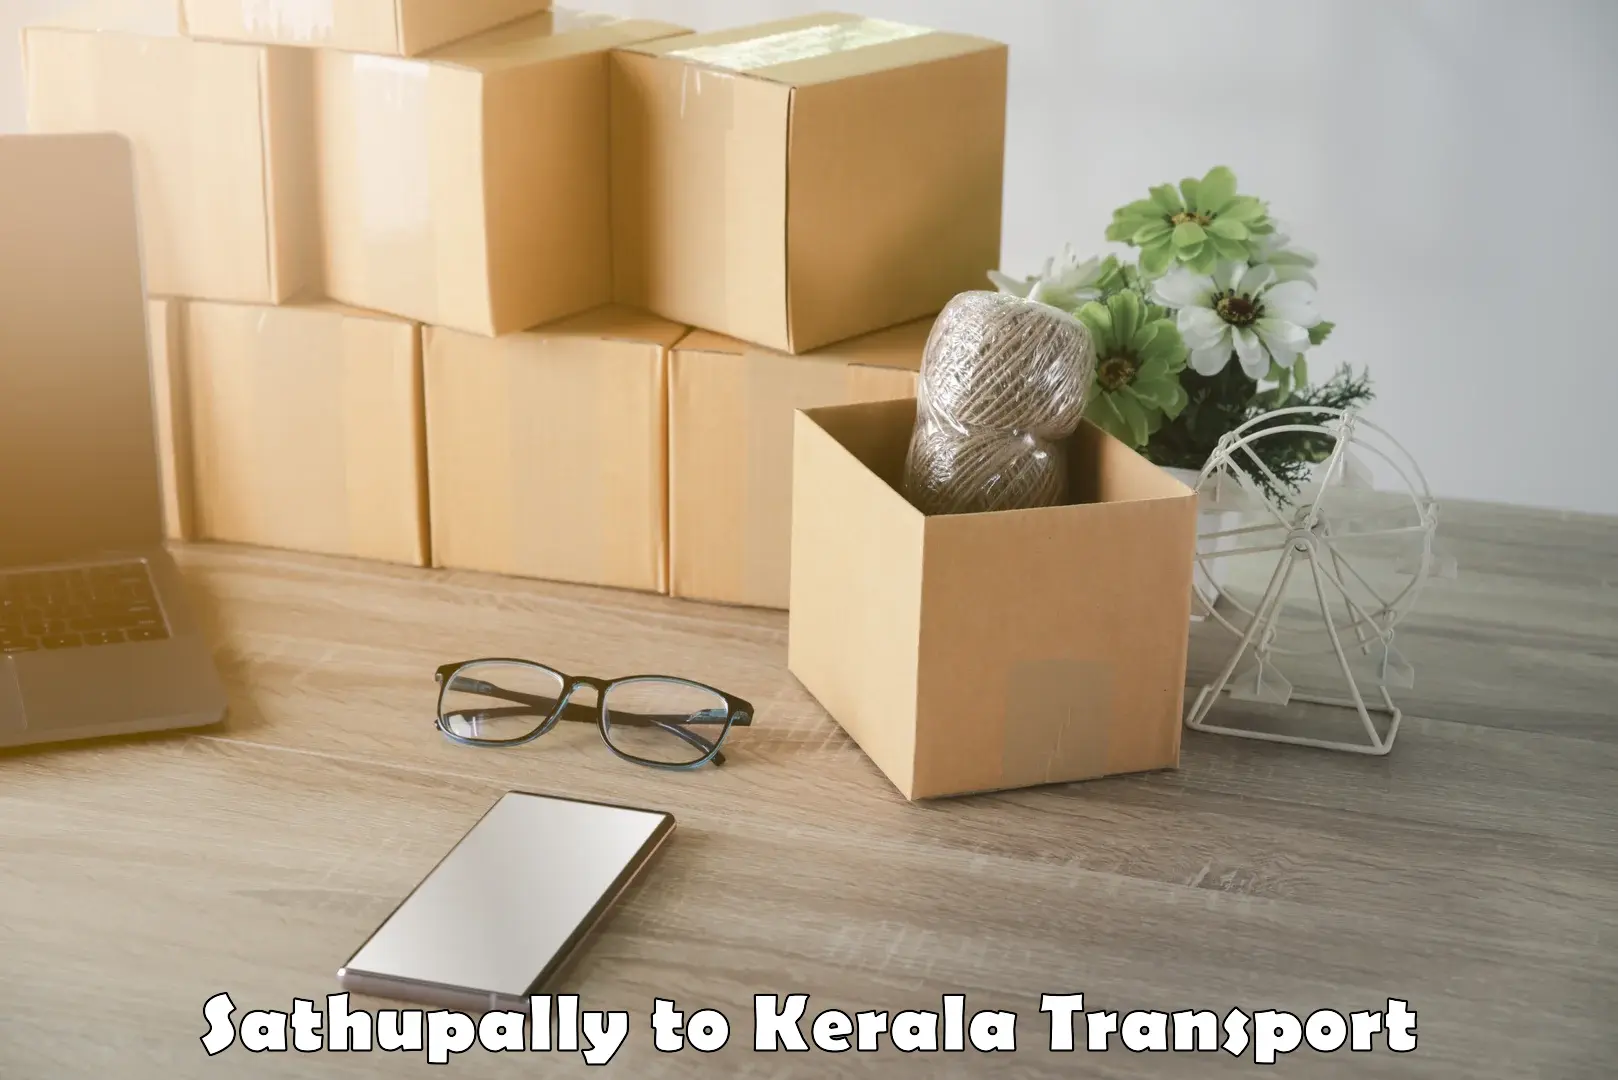 Express transport services Sathupally to Ernakulam